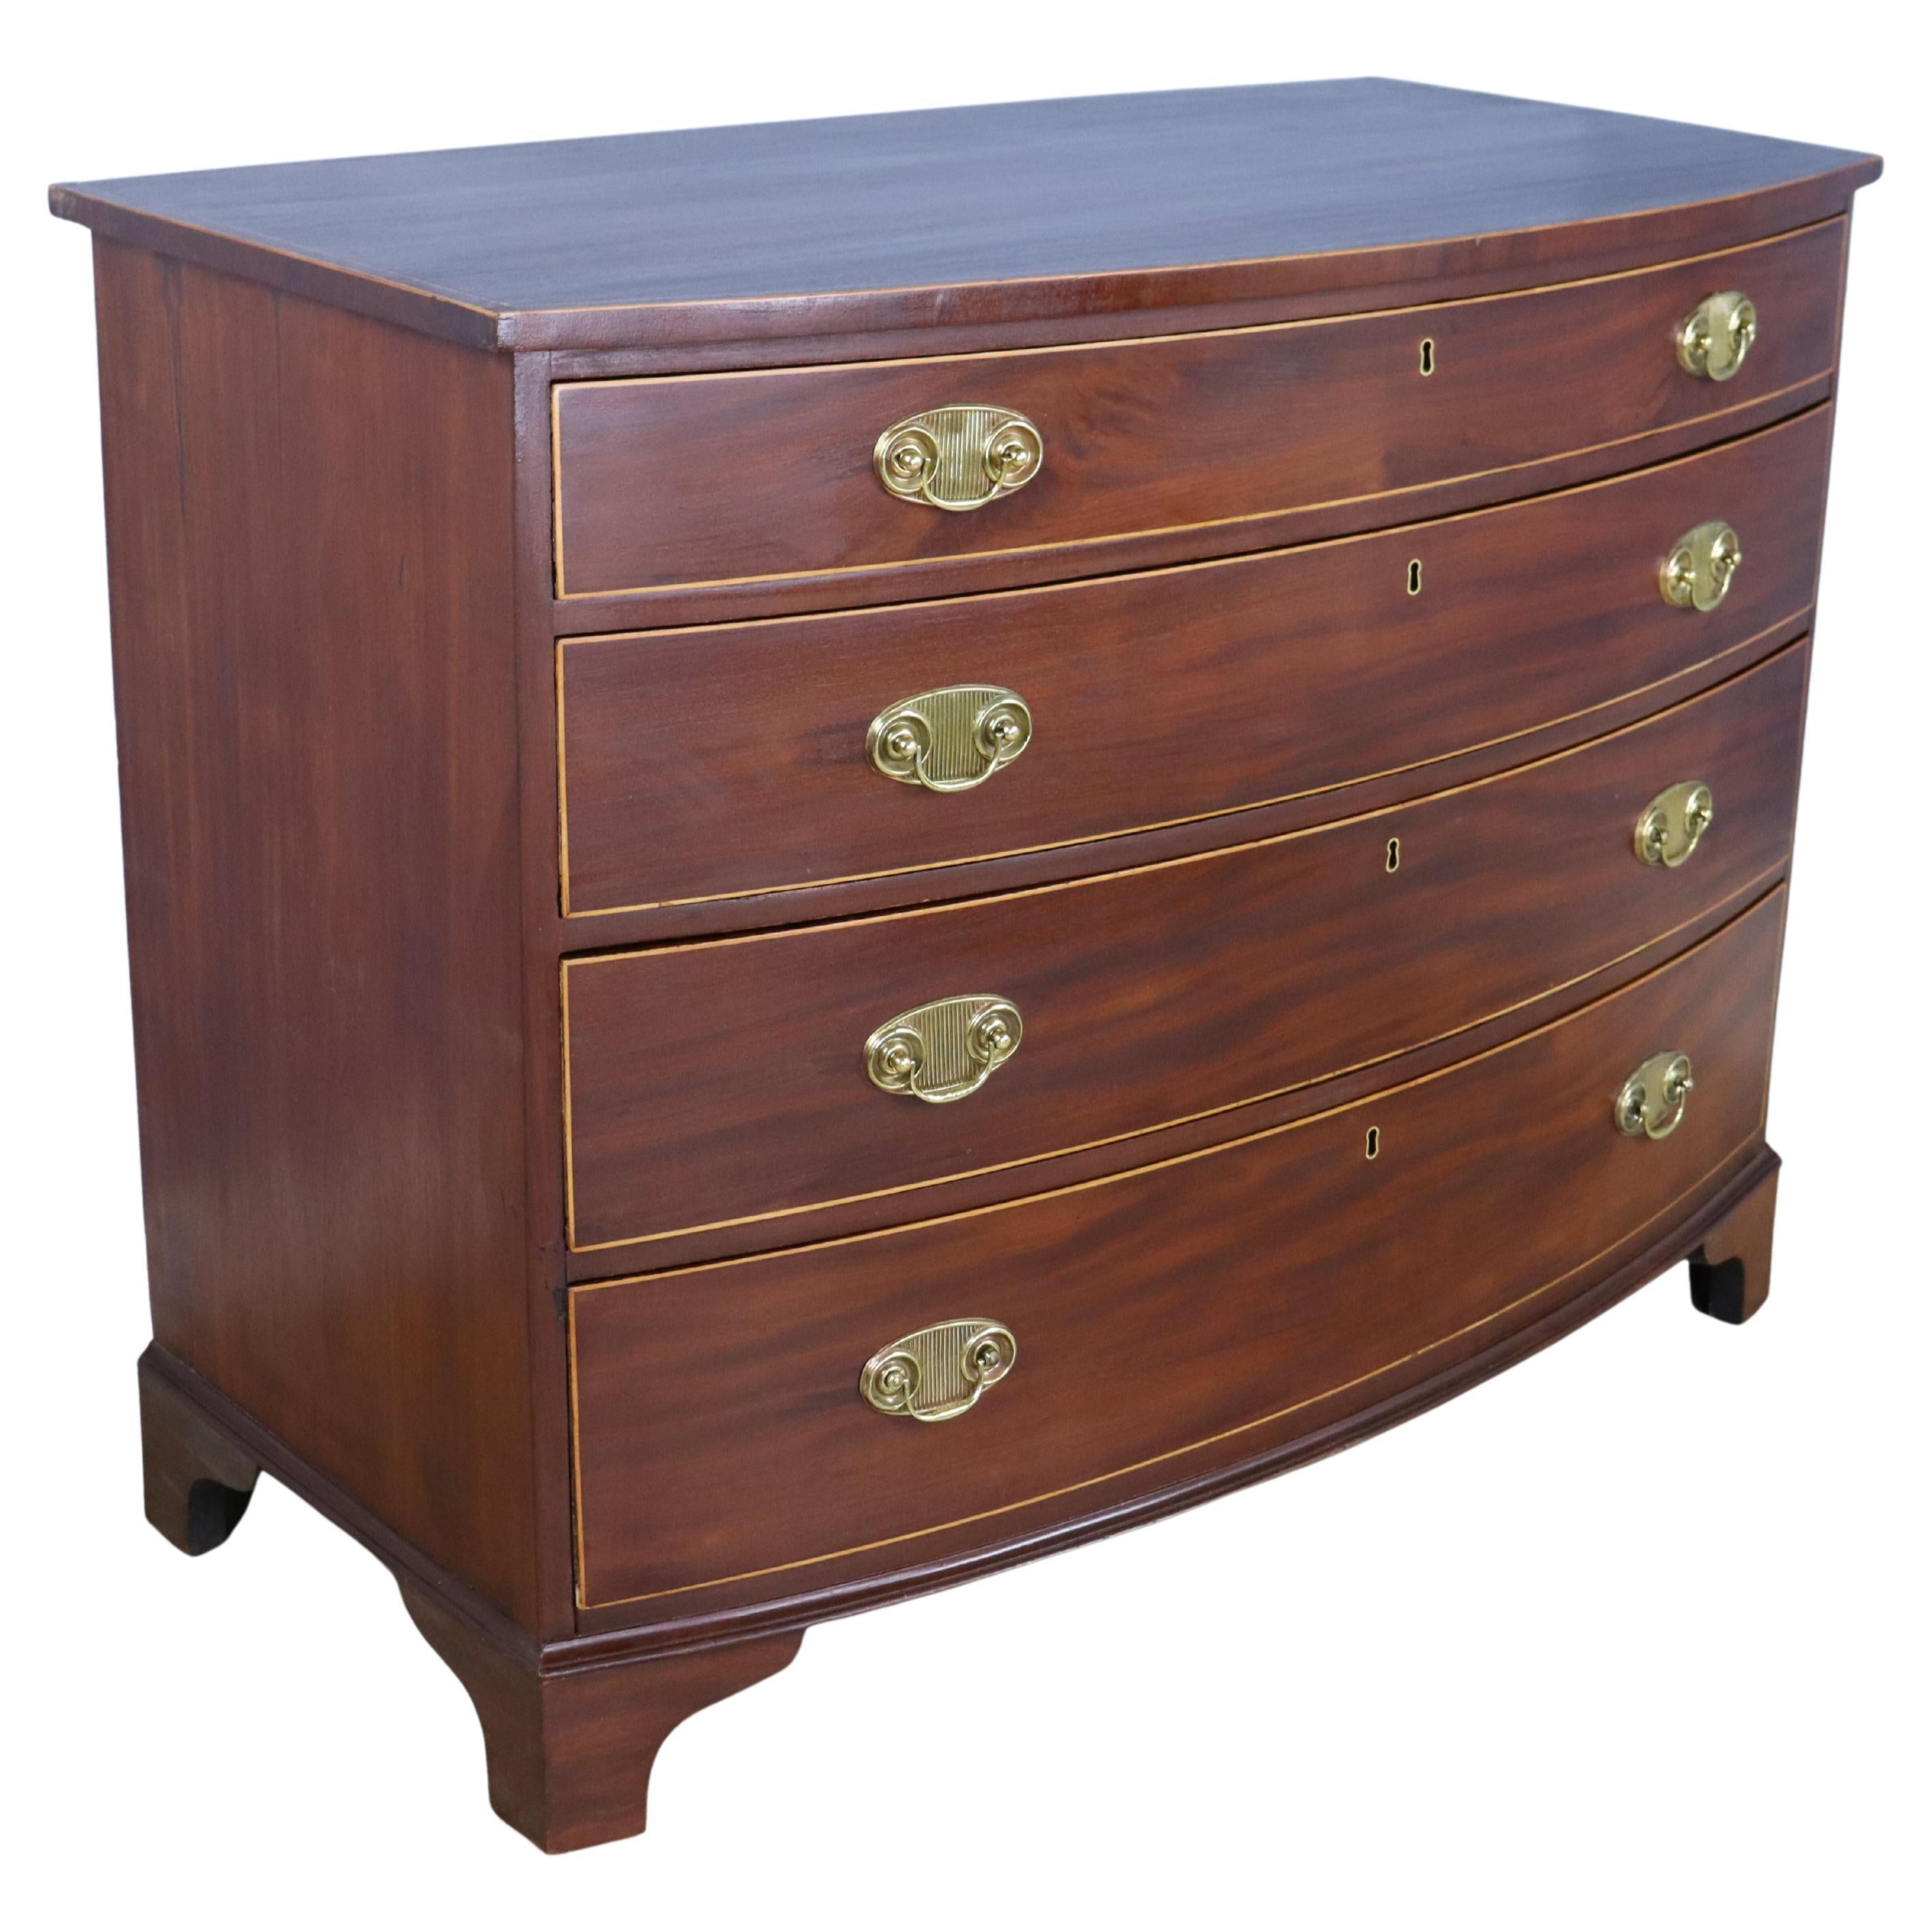 Sheraton Bowfront Chest of Drawers